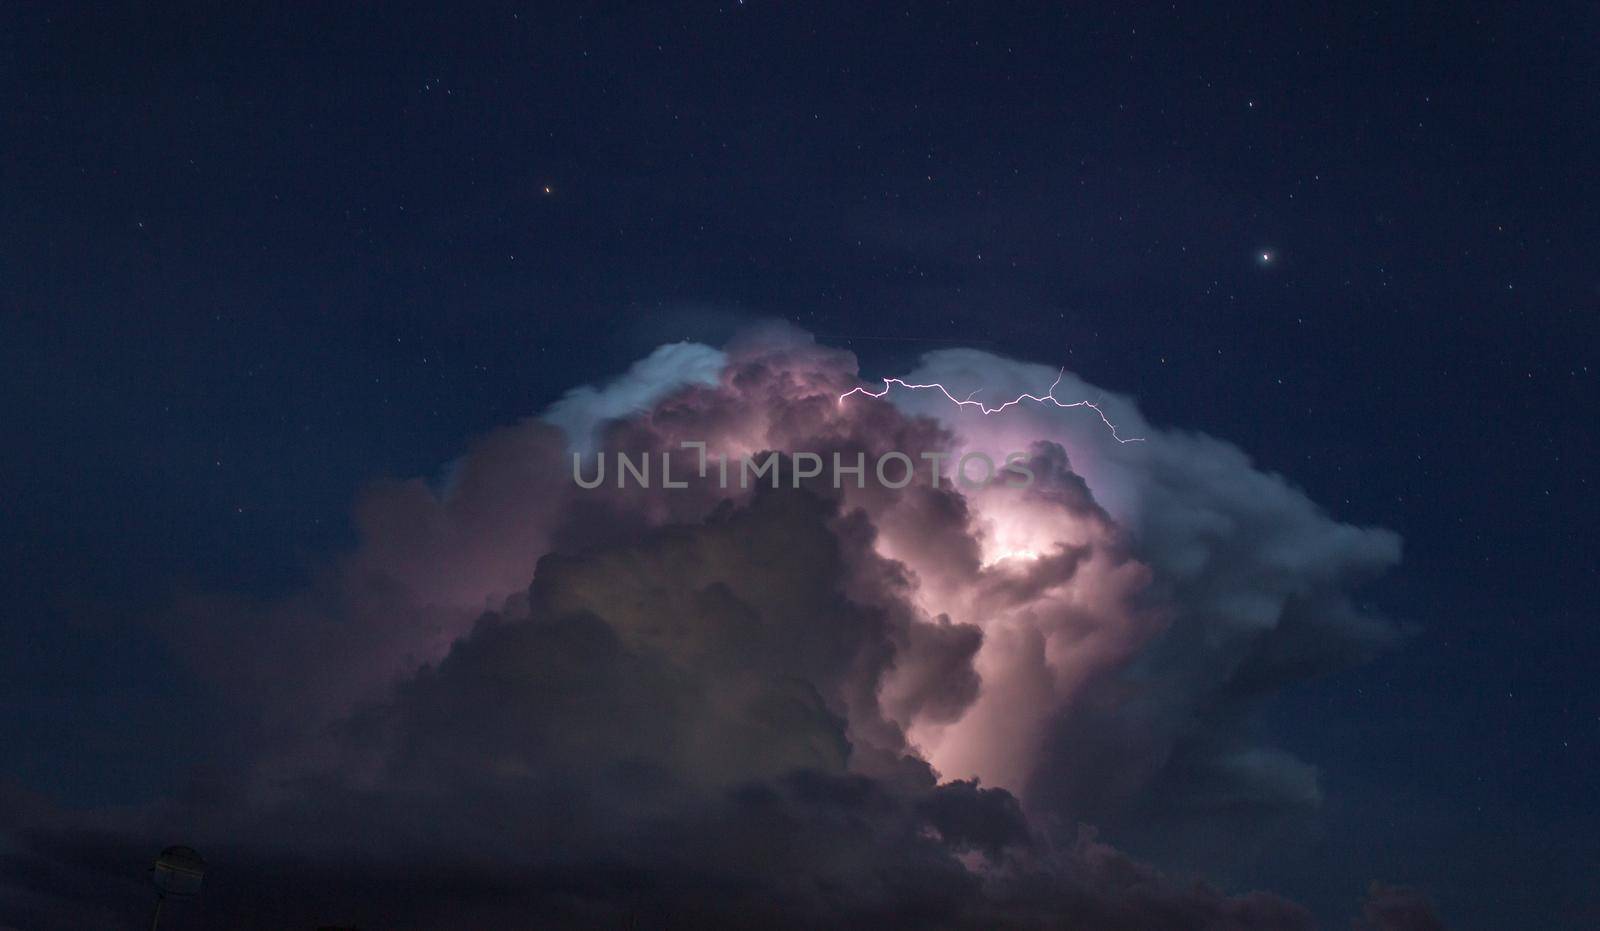 Storm cloud with some lightning in the australian outback, cloncurry, australia, northern territory by bettercallcurry